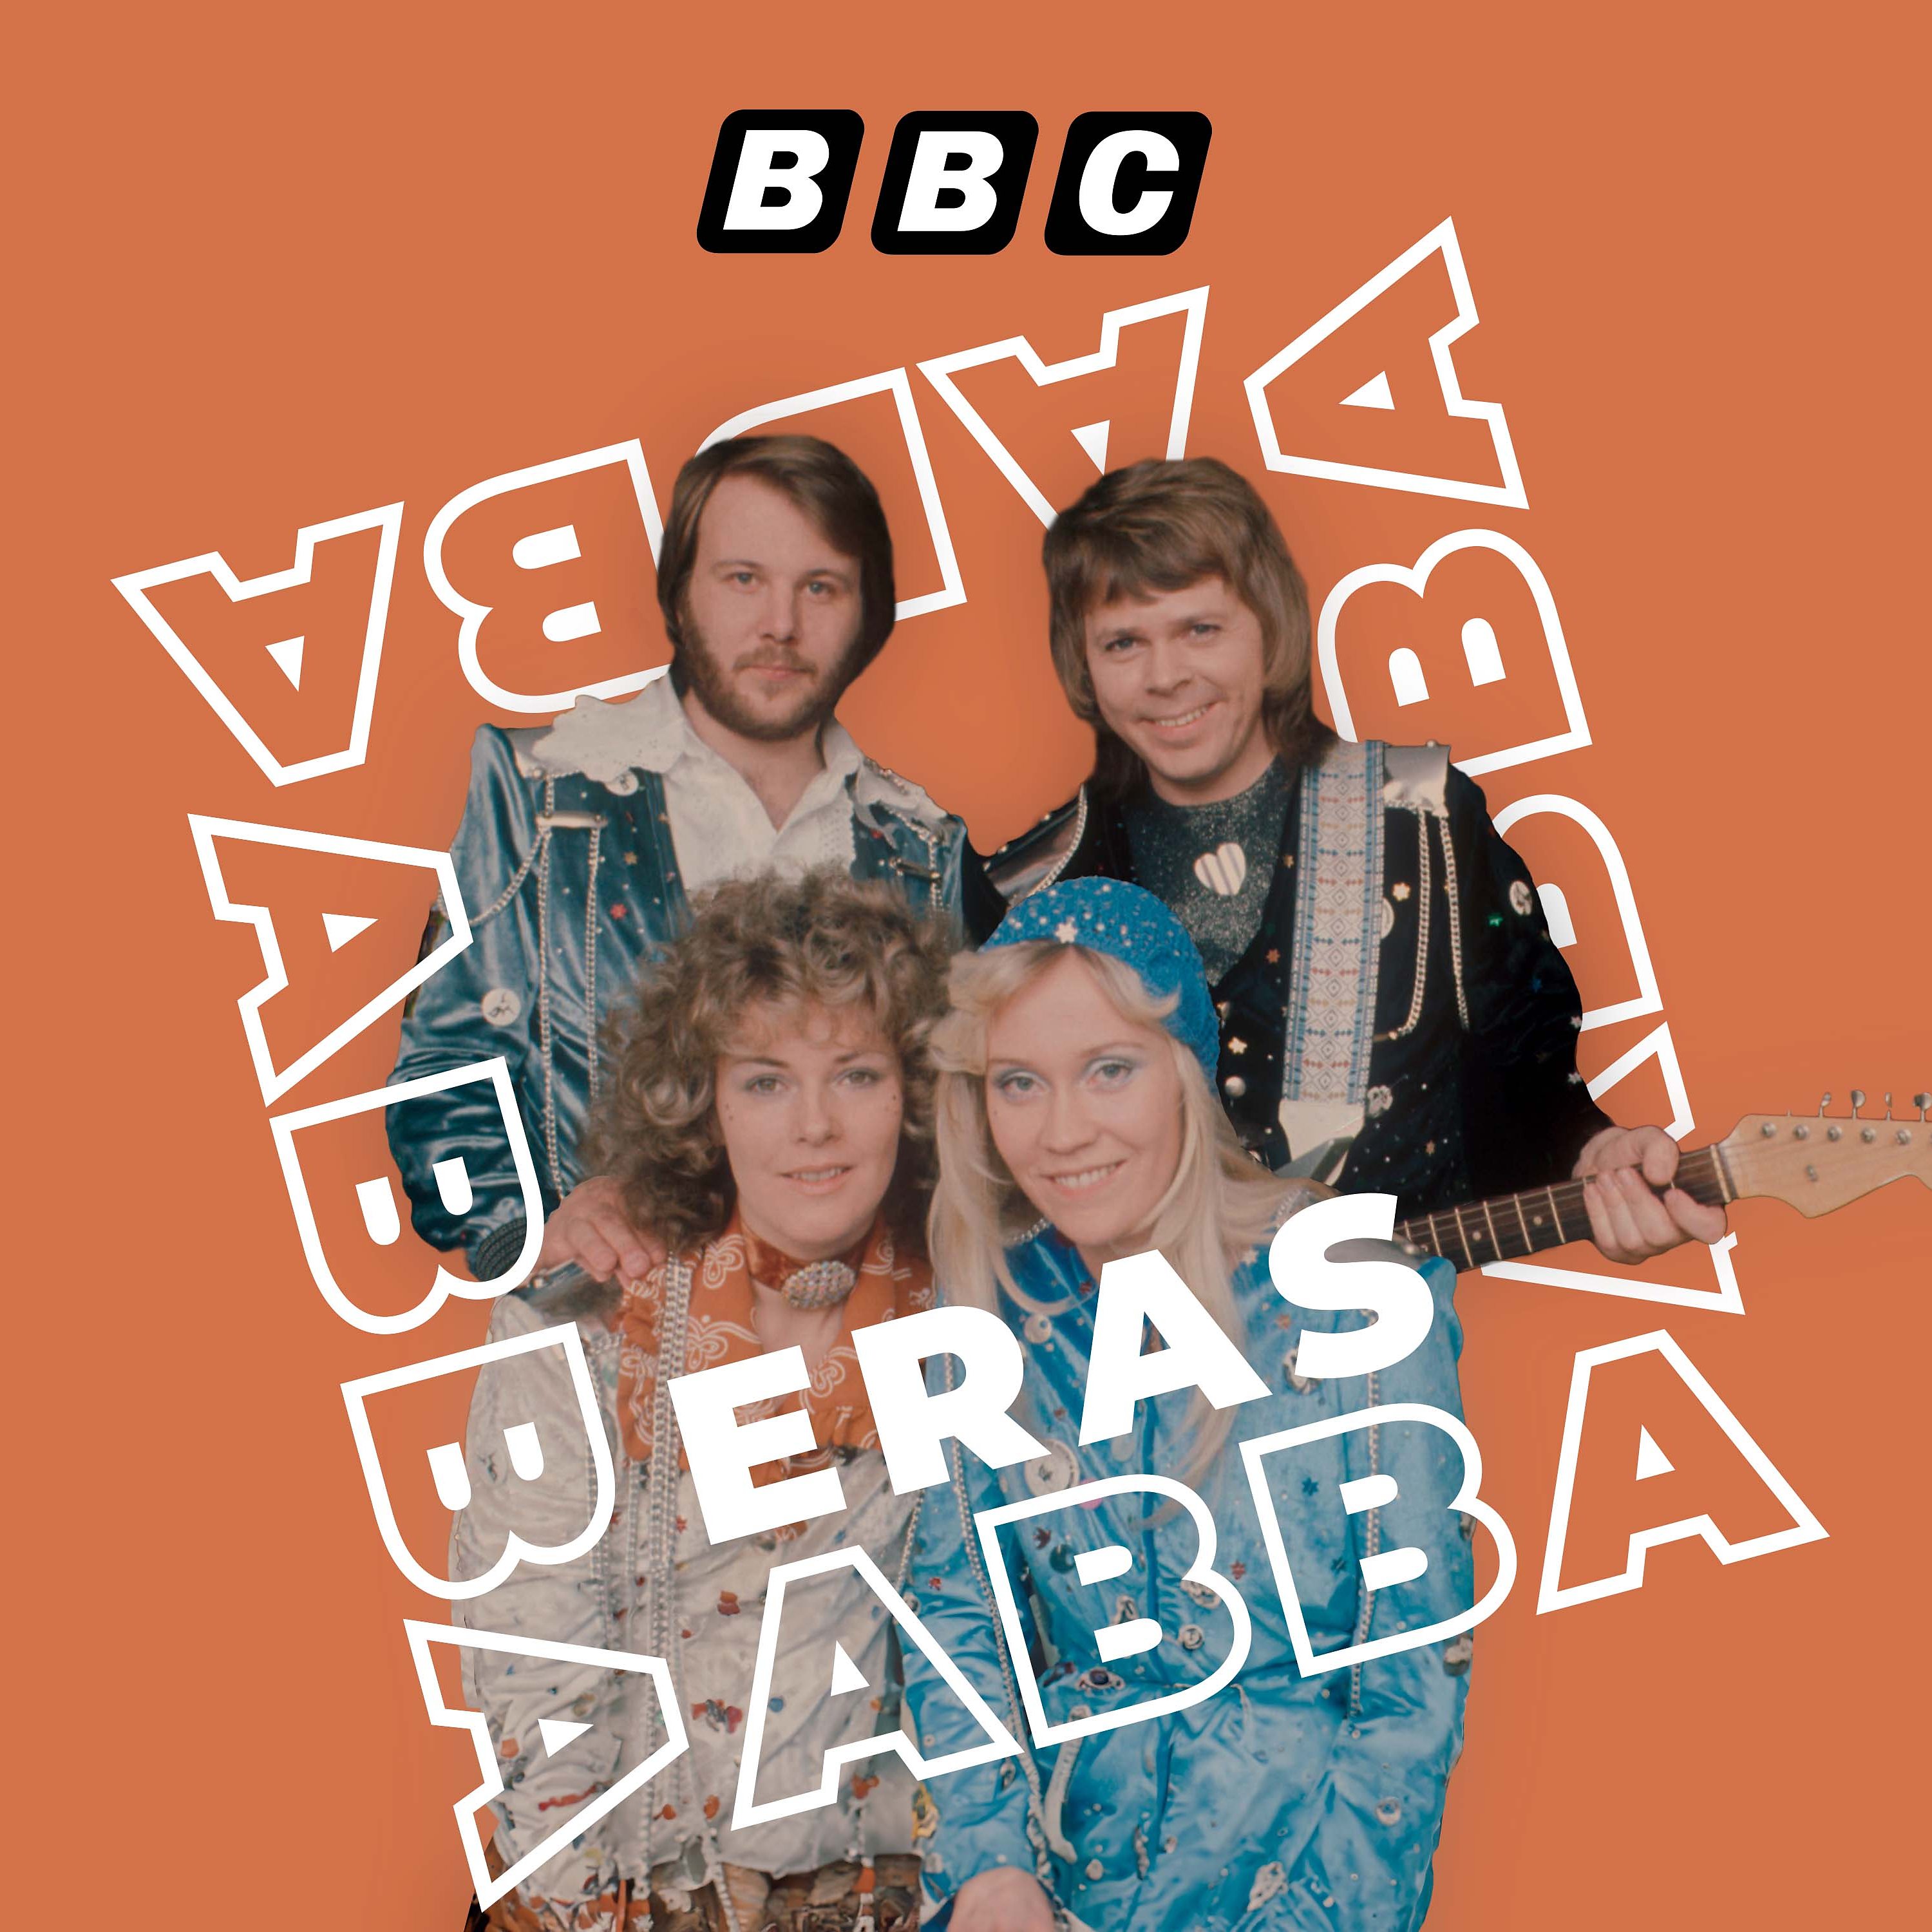 ABBA: 1. The Road to Waterloo